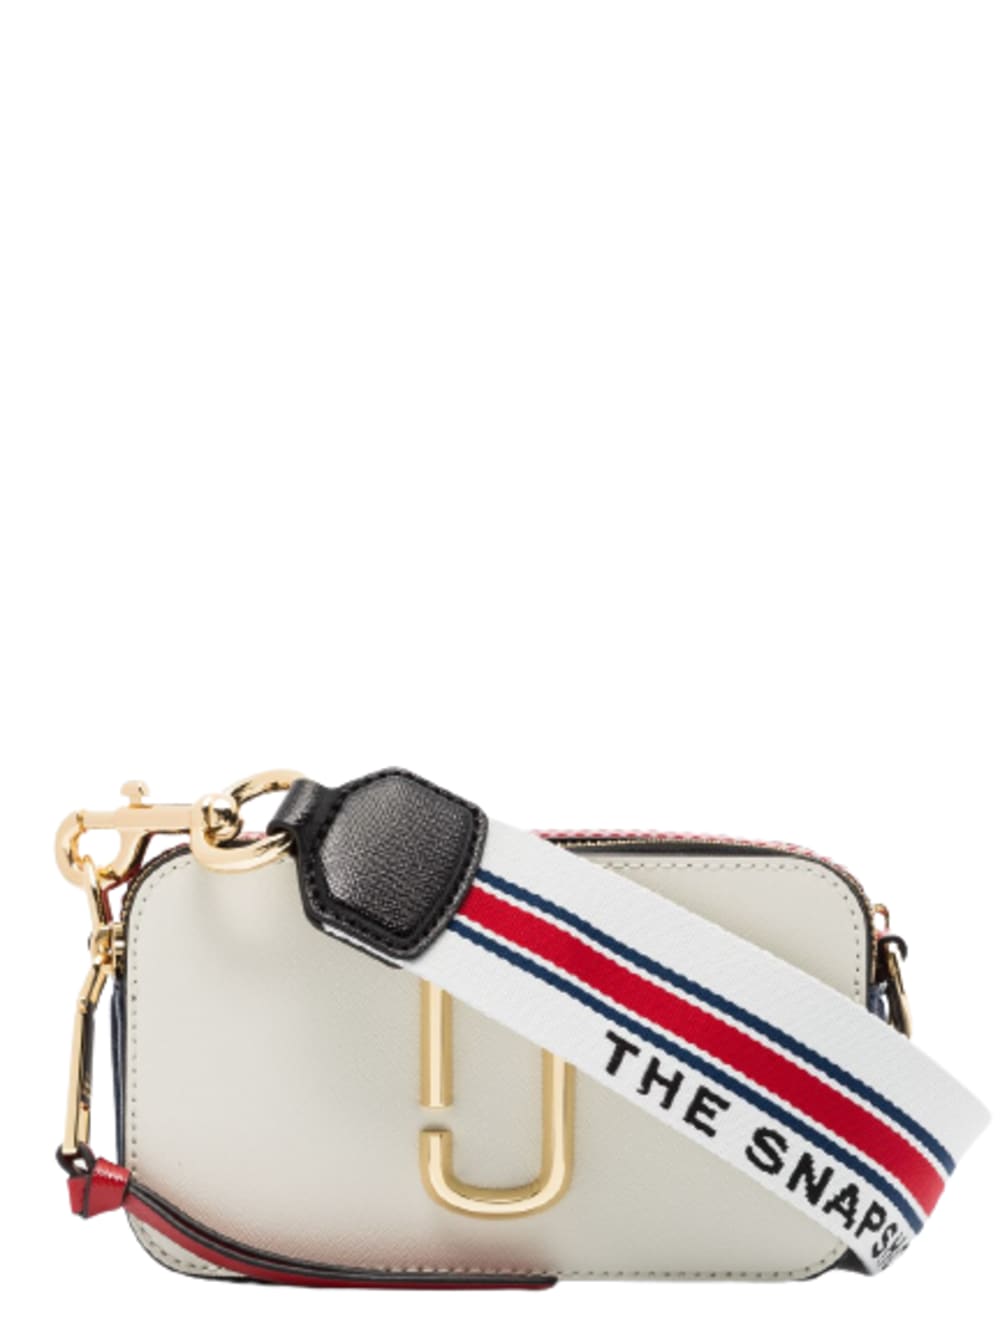 Marc Jacobs Womans Snapshot 21 Multicolor Leather Crossbody Bag